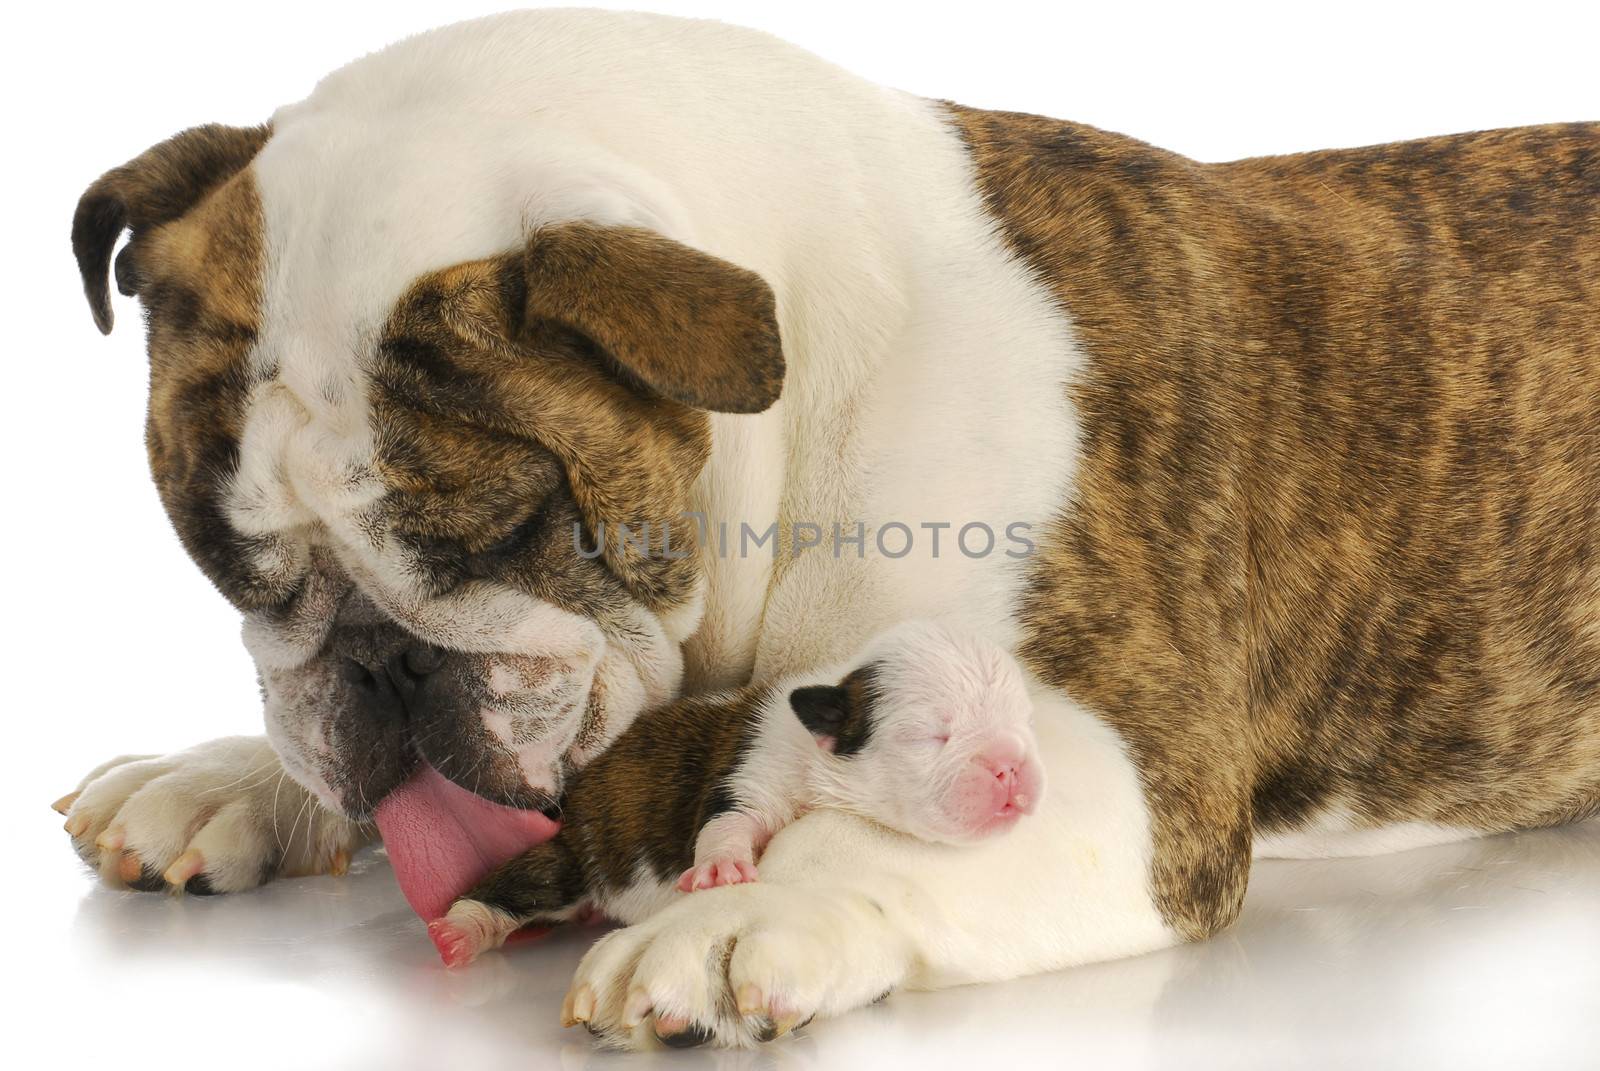 newborn puppy being cleaned by willeecole123